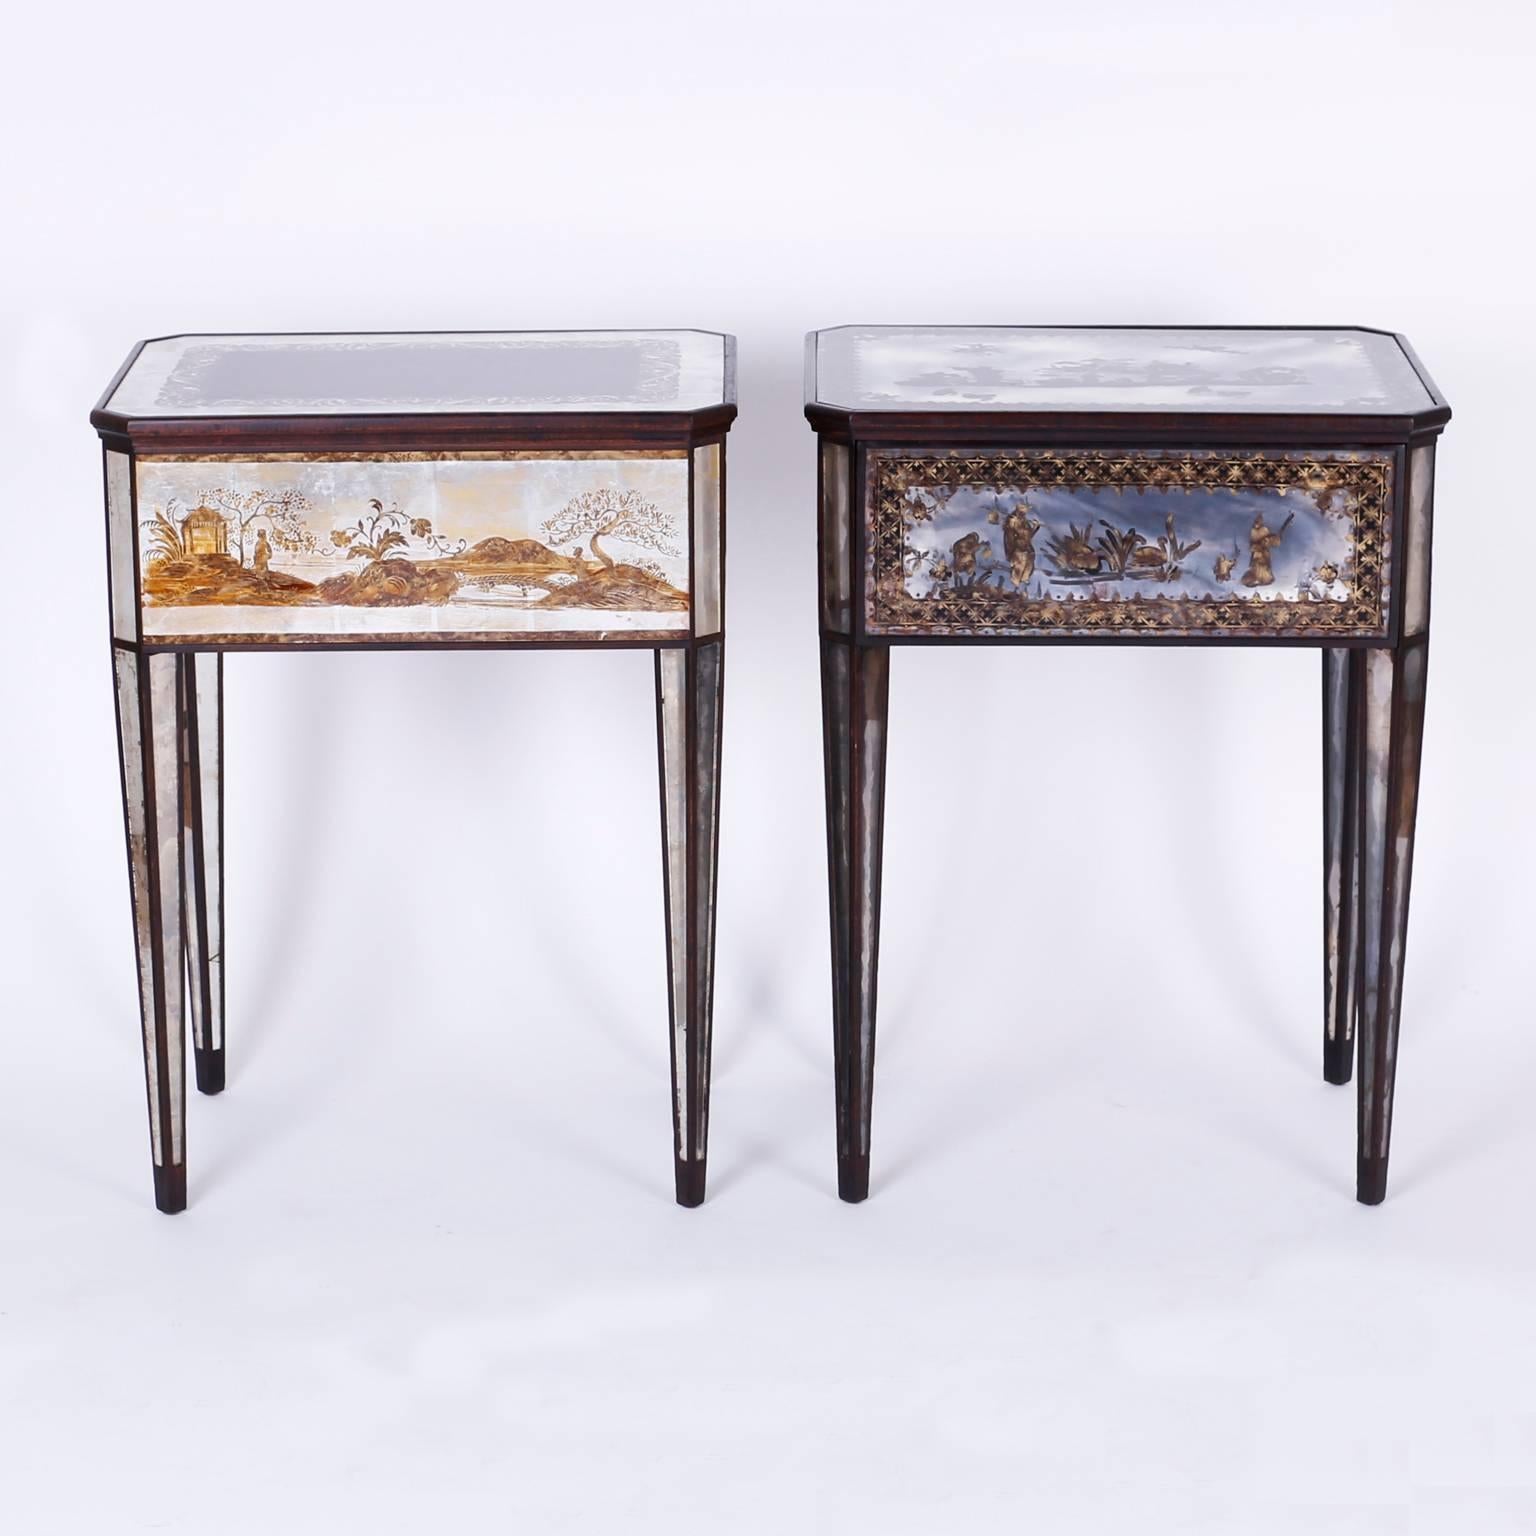 Chic pair of Italian one drawer stands that can function as nightstands or end tables. Constructed with wood frames and featuring inset reverse painted églomisé' glass panels depicting chinoiserie scenes on the tops and on all four sides, supported